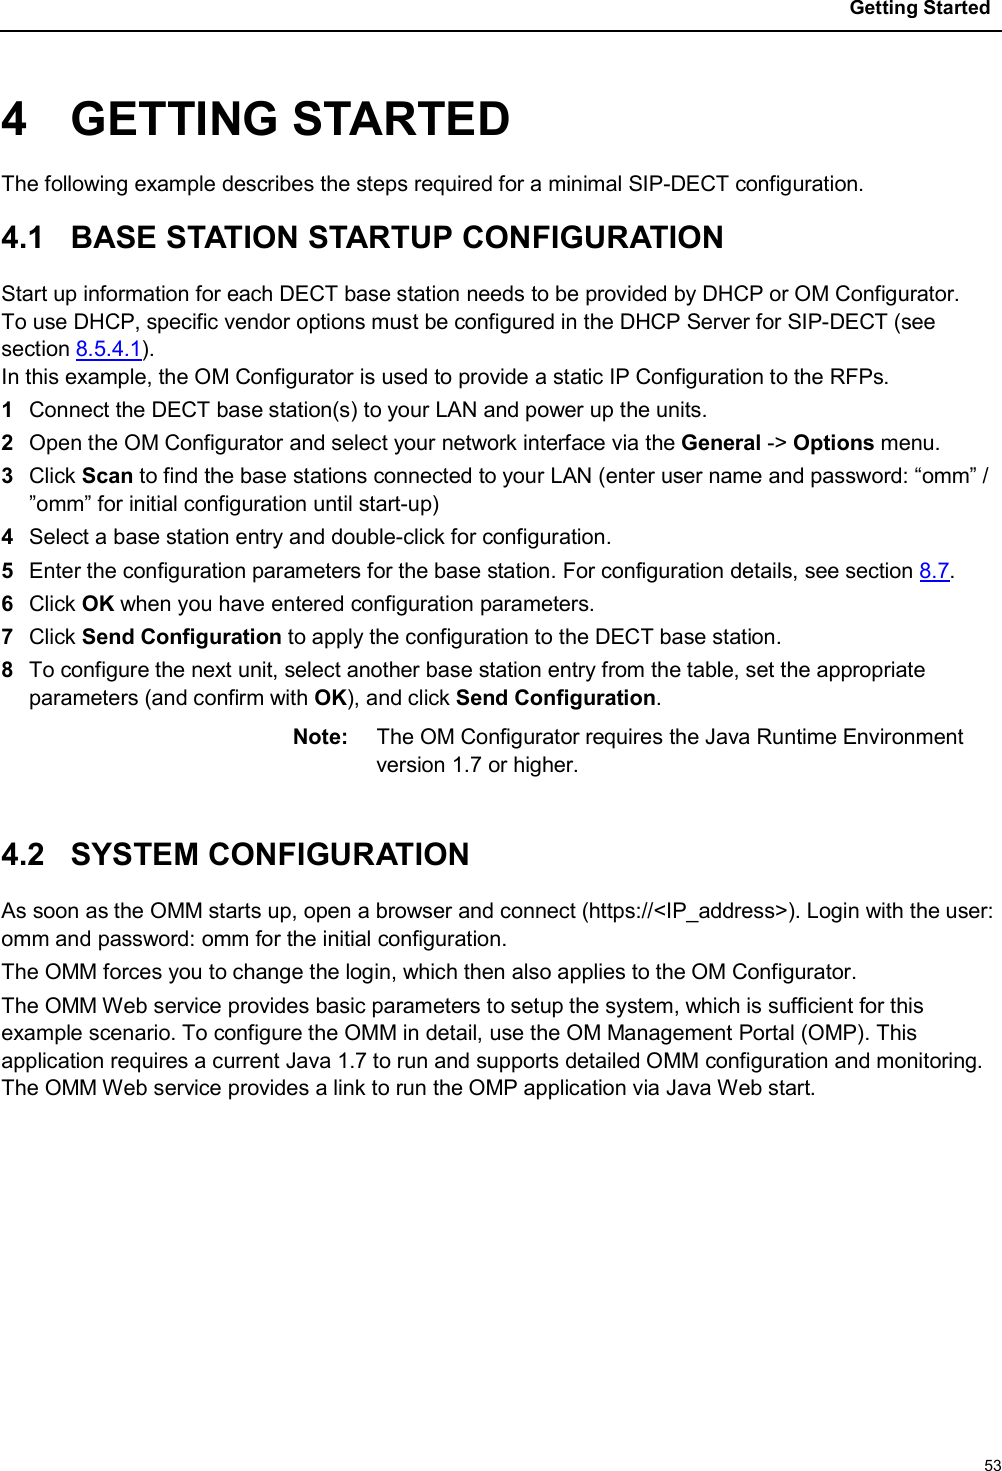 Getting Started534 GETTING STARTEDThe following example describes the steps required for a minimal SIP-DECT configuration.4.1 BASE STATION STARTUP CONFIGURATIONStart up information for each DECT base station needs to be provided by DHCP or OM Configurator.To use DHCP, specific vendor options must be configured in the DHCP Server for SIP-DECT (see section 8.5.4.1).In this example, the OM Configurator is used to provide a static IP Configuration to the RFPs.1Connect the DECT base station(s) to your LAN and power up the units.2Open the OM Configurator and select your network interface via the General -&gt; Options menu.3Click Scan to find the base stations connected to your LAN (enter user name and password: “omm” / ”omm” for initial configuration until start-up)4Select a base station entry and double-click for configuration.5Enter the configuration parameters for the base station. For configuration details, see section 8.7.6Click OK when you have entered configuration parameters.7Click Send Configuration to apply the configuration to the DECT base station.8To configure the next unit, select another base station entry from the table, set the appropriate parameters (and confirm with OK), and click Send Configuration.Note: The OM Configurator requires the Java Runtime Environment version 1.7 or higher.4.2 SYSTEM CONFIGURATIONAs soon as the OMM starts up, open a browser and connect (https://&lt;IP_address&gt;). Login with the user: omm and password: omm for the initial configuration.The OMM forces you to change the login, which then also applies to the OM Configurator.The OMM Web service provides basic parameters to setup the system, which is sufficient for this example scenario. To configure the OMM in detail, use the OM Management Portal (OMP). This application requires a current Java 1.7 to run and supports detailed OMM configuration and monitoring.The OMM Web service provides a link to run the OMP application via Java Web start.